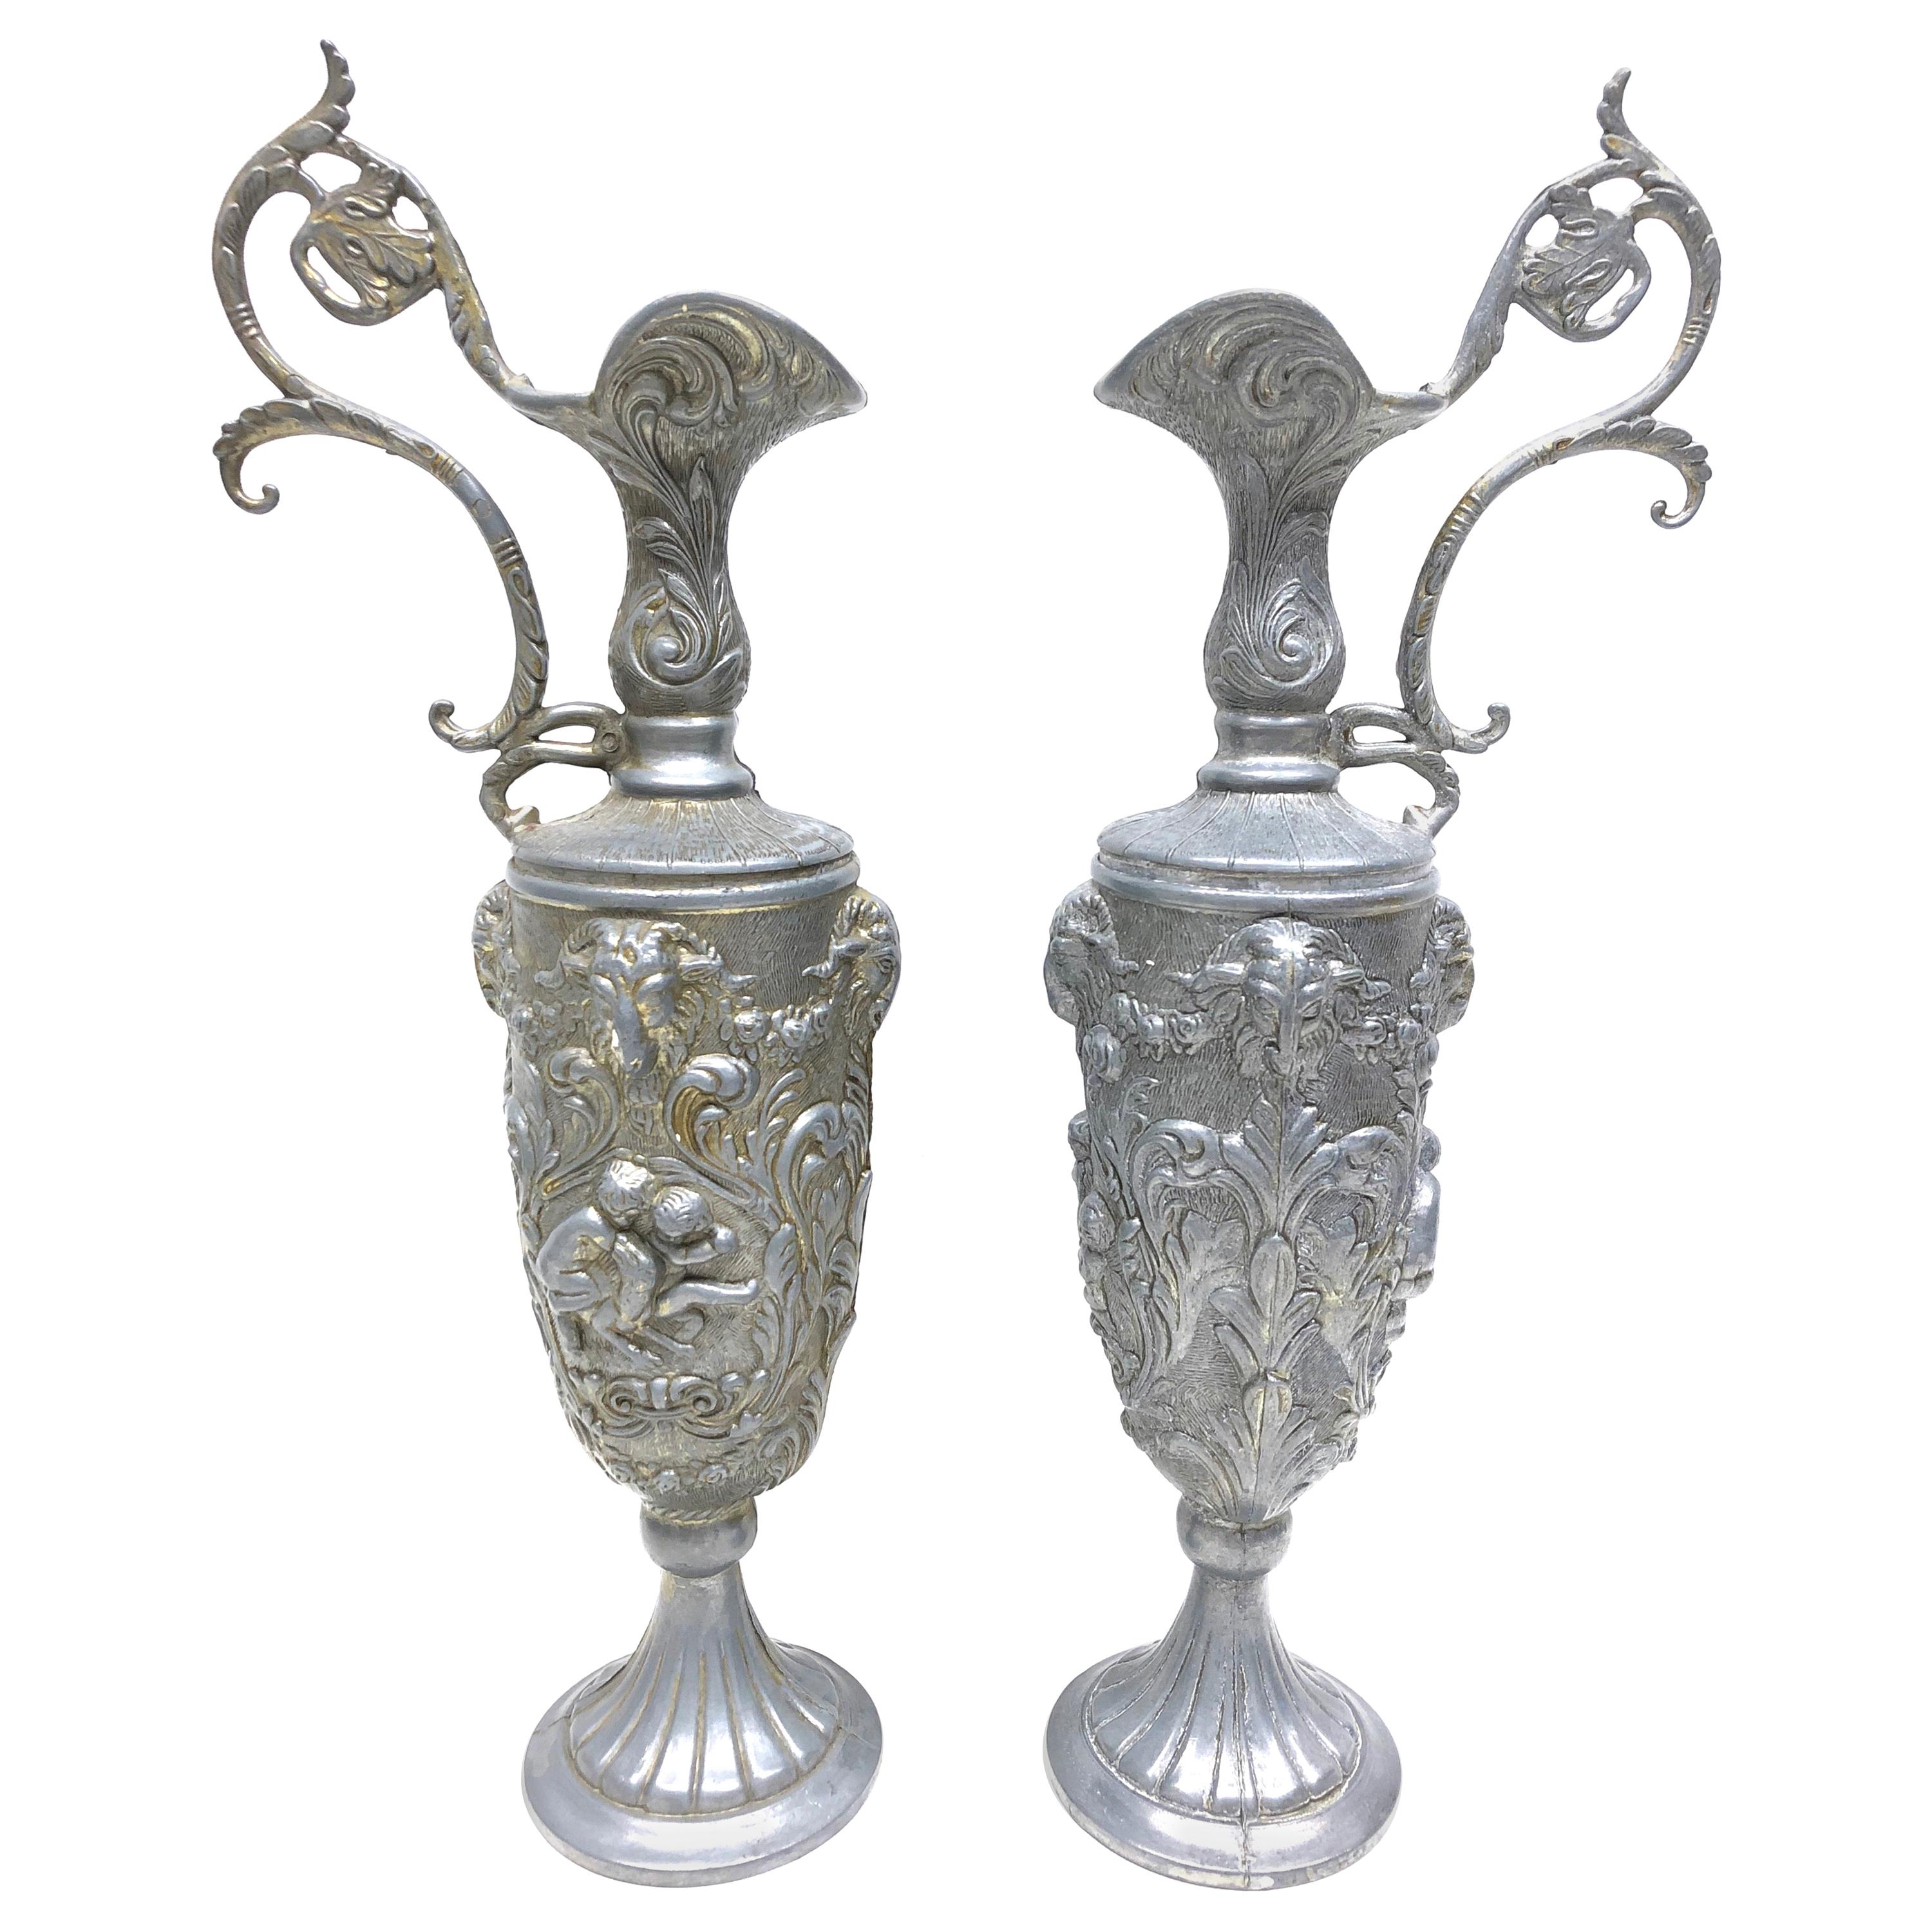 Pair of Vintage Italian Pewter Ewer with Cherub and Rams, Italy Art Nouveau